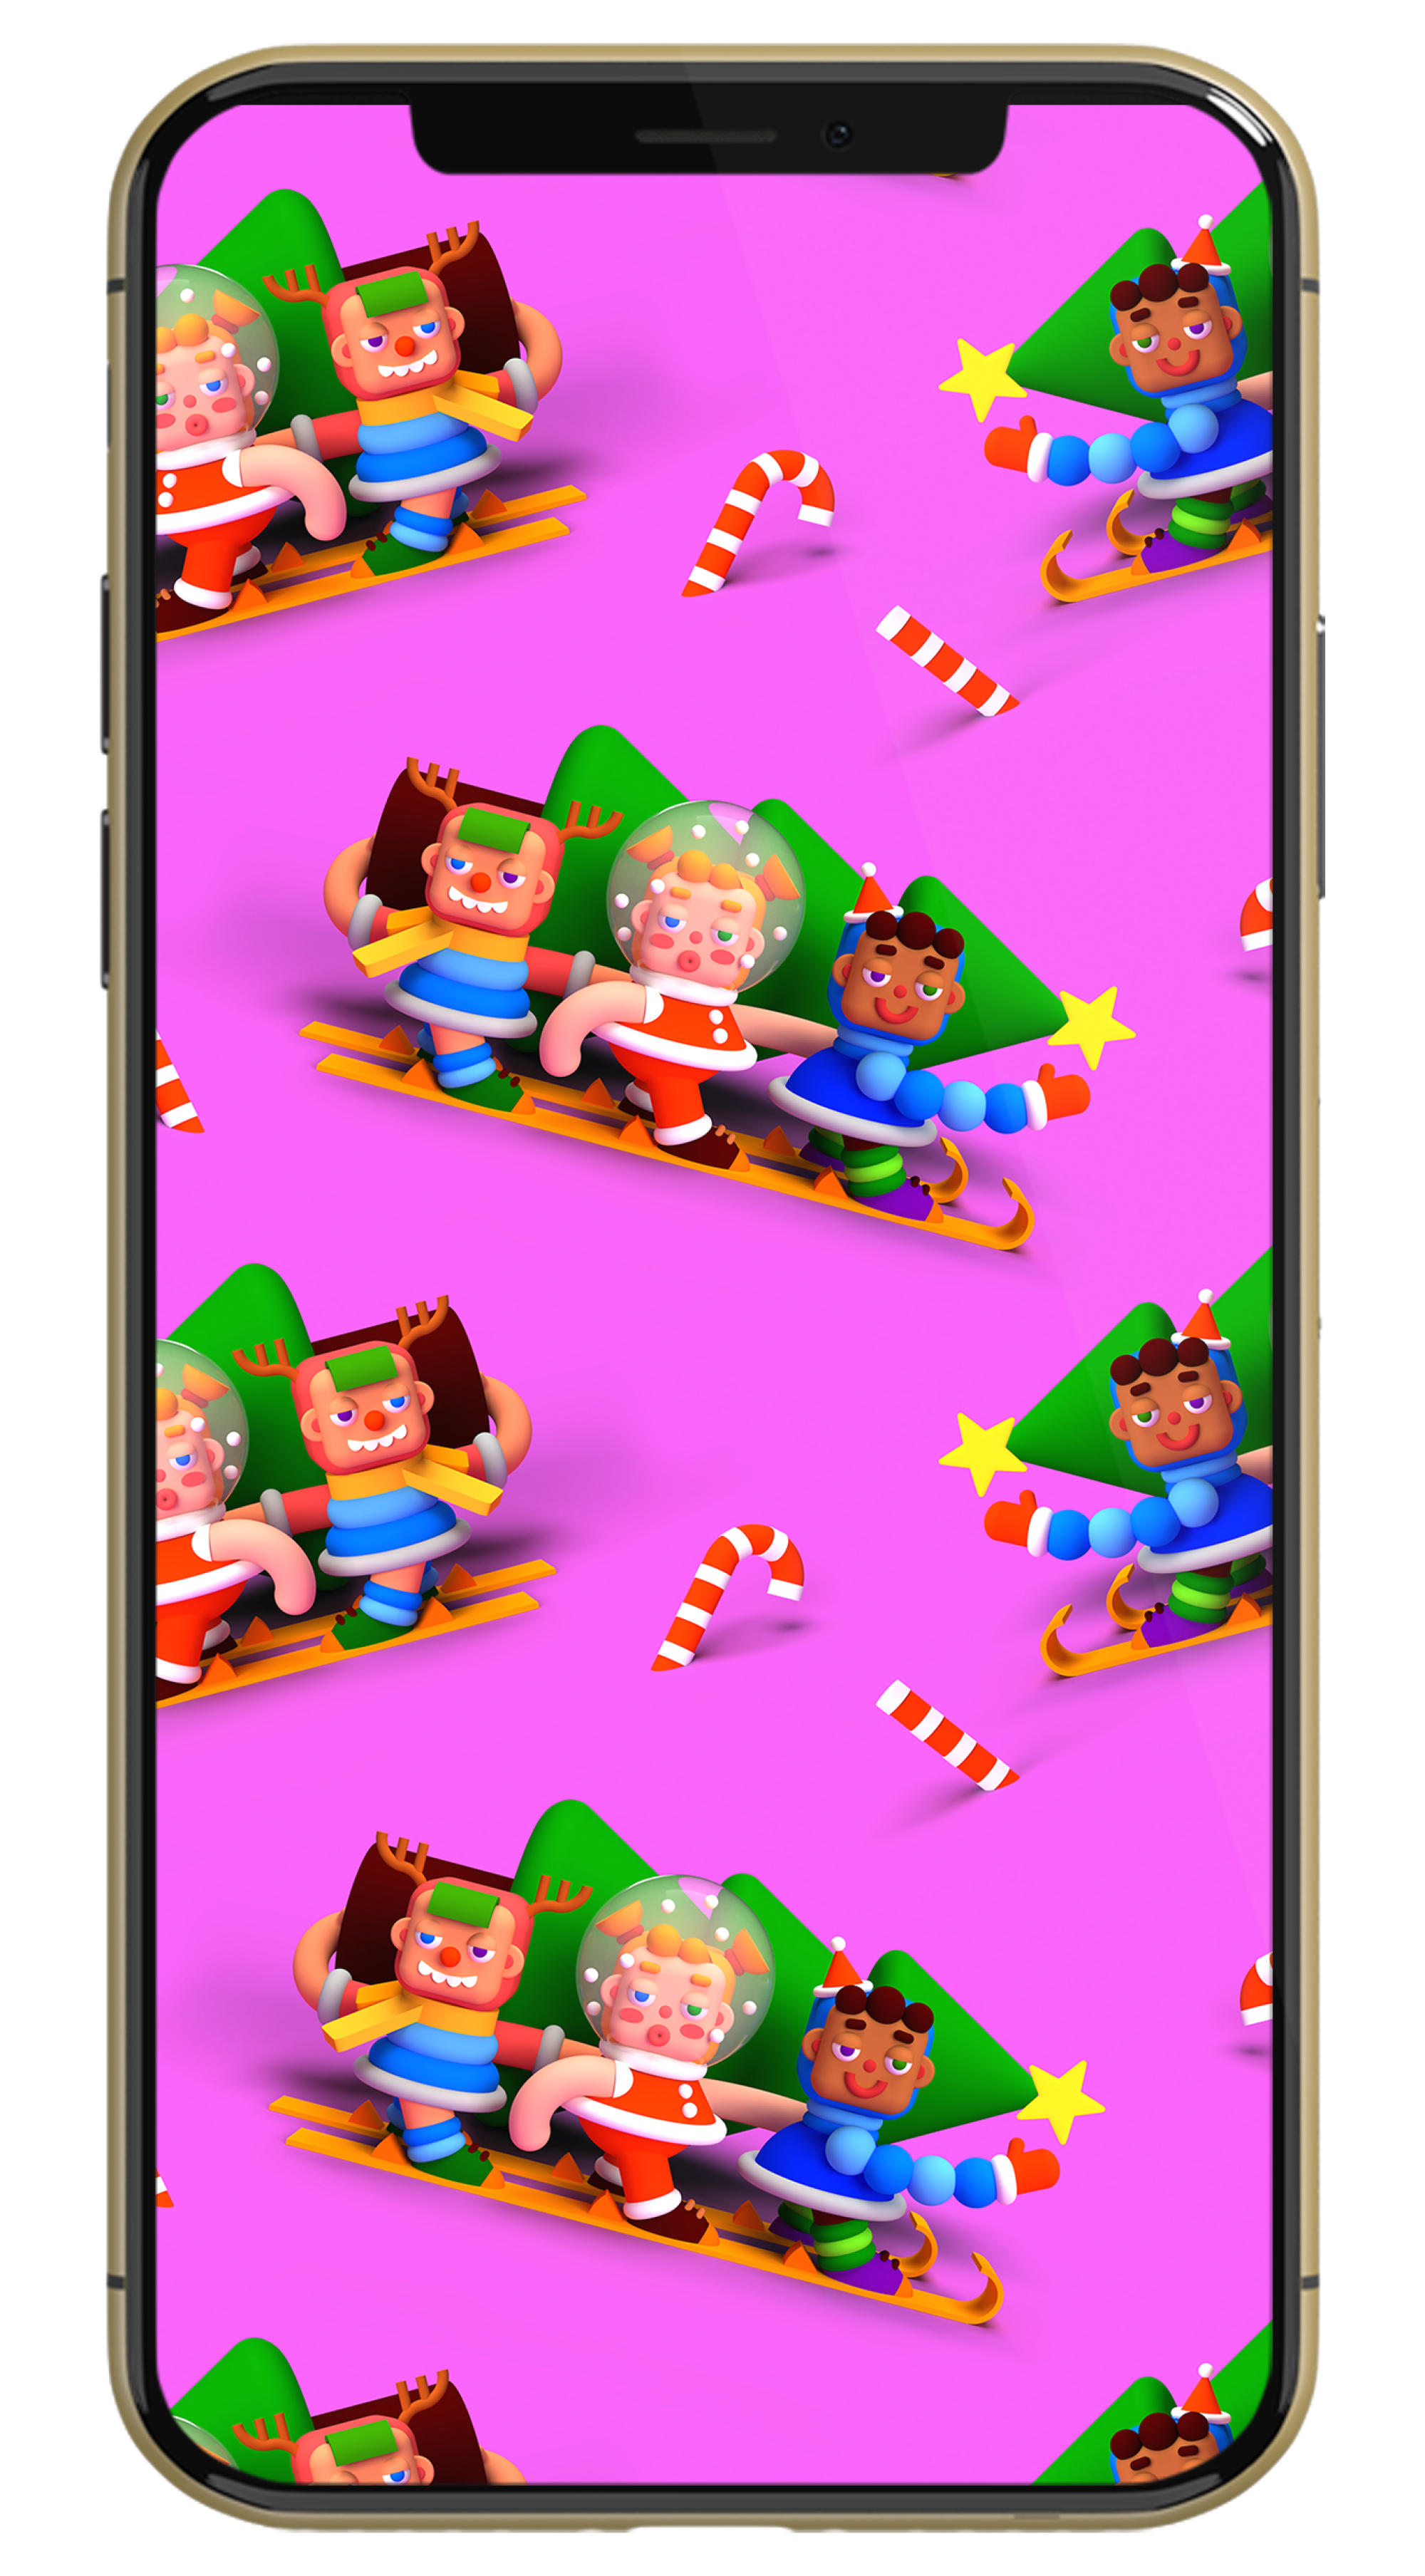 Wallpaper illustration on an Iphone of three 3D characters skiing while carrying a Christmas tree. 